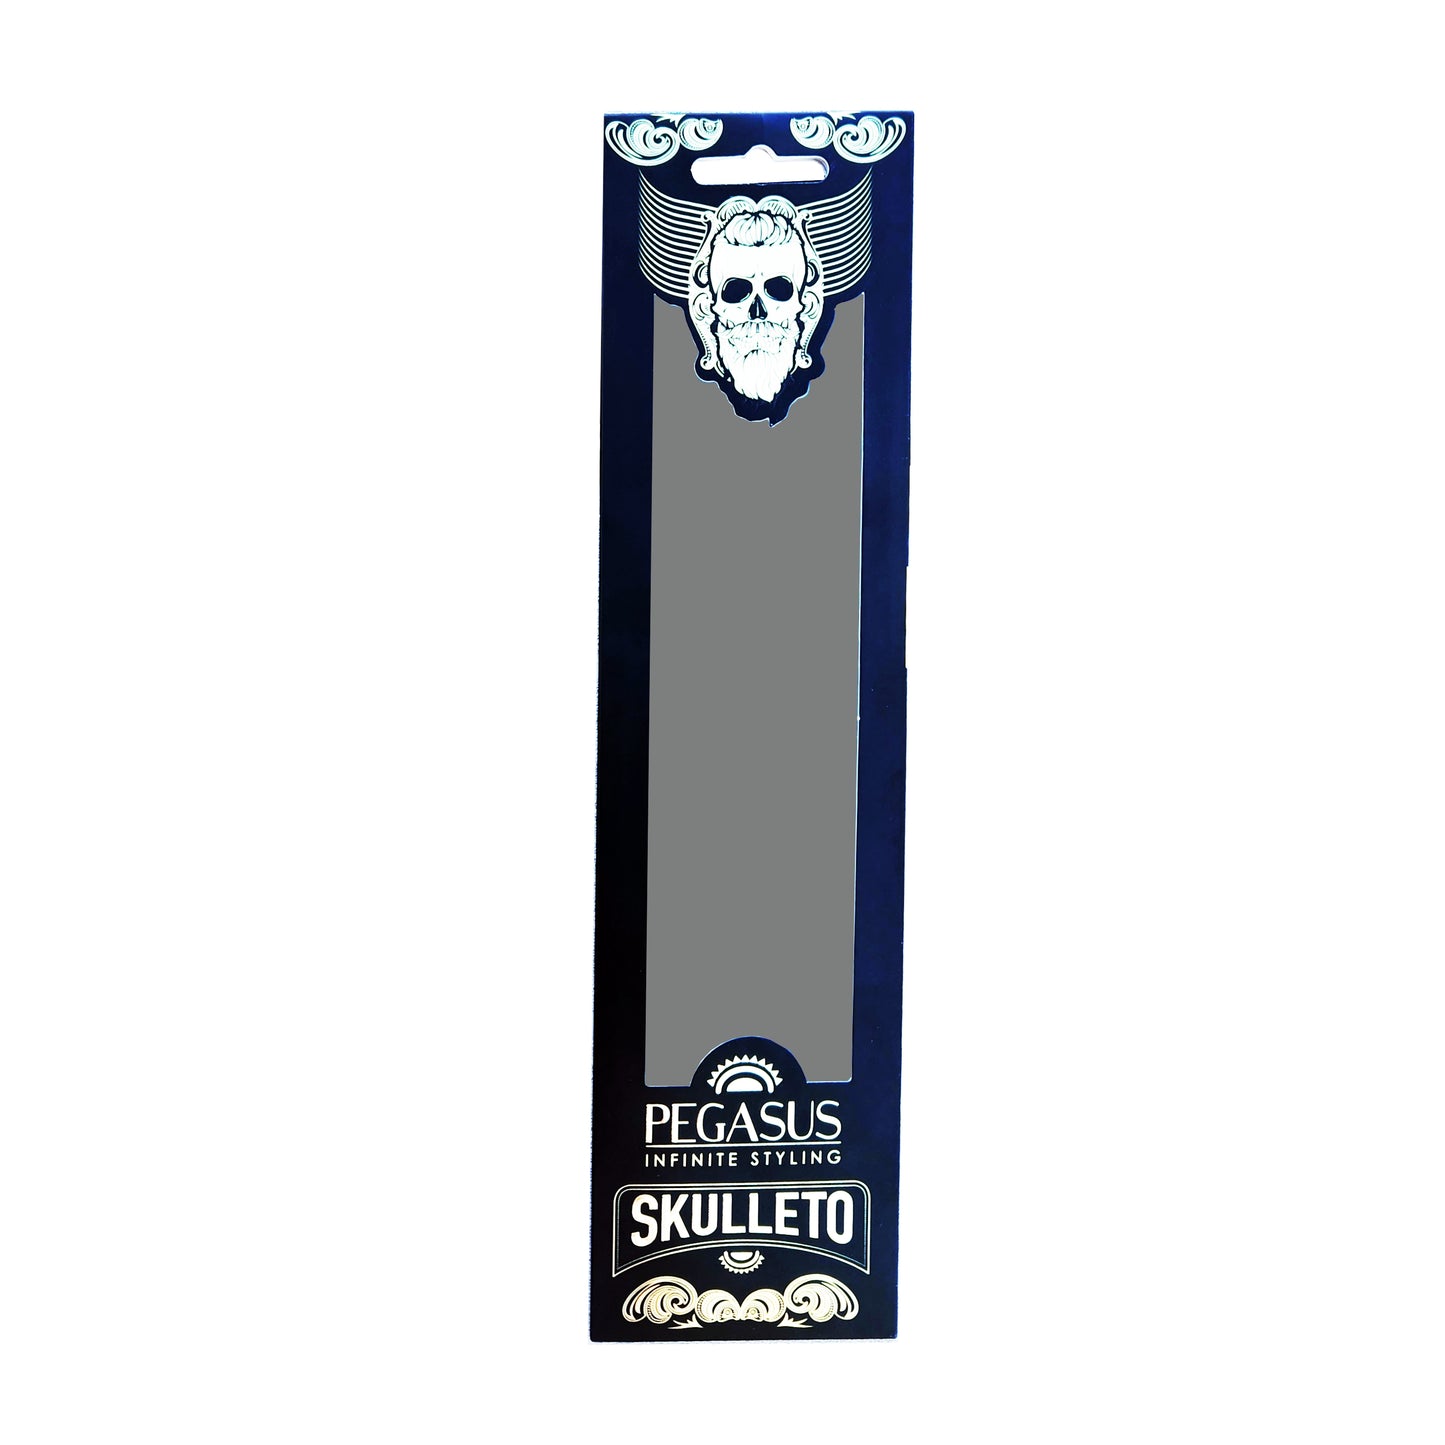 Pegasus Skulleto 303, 6.5in Hard Rubber Heavy Barber Comb, Handmade, Seamless, Smooth Edges, Anti Static, Heat and Chemically Resistant, Wet Hair, Everyday Grooming Comb | Peines de goma dura - Gold